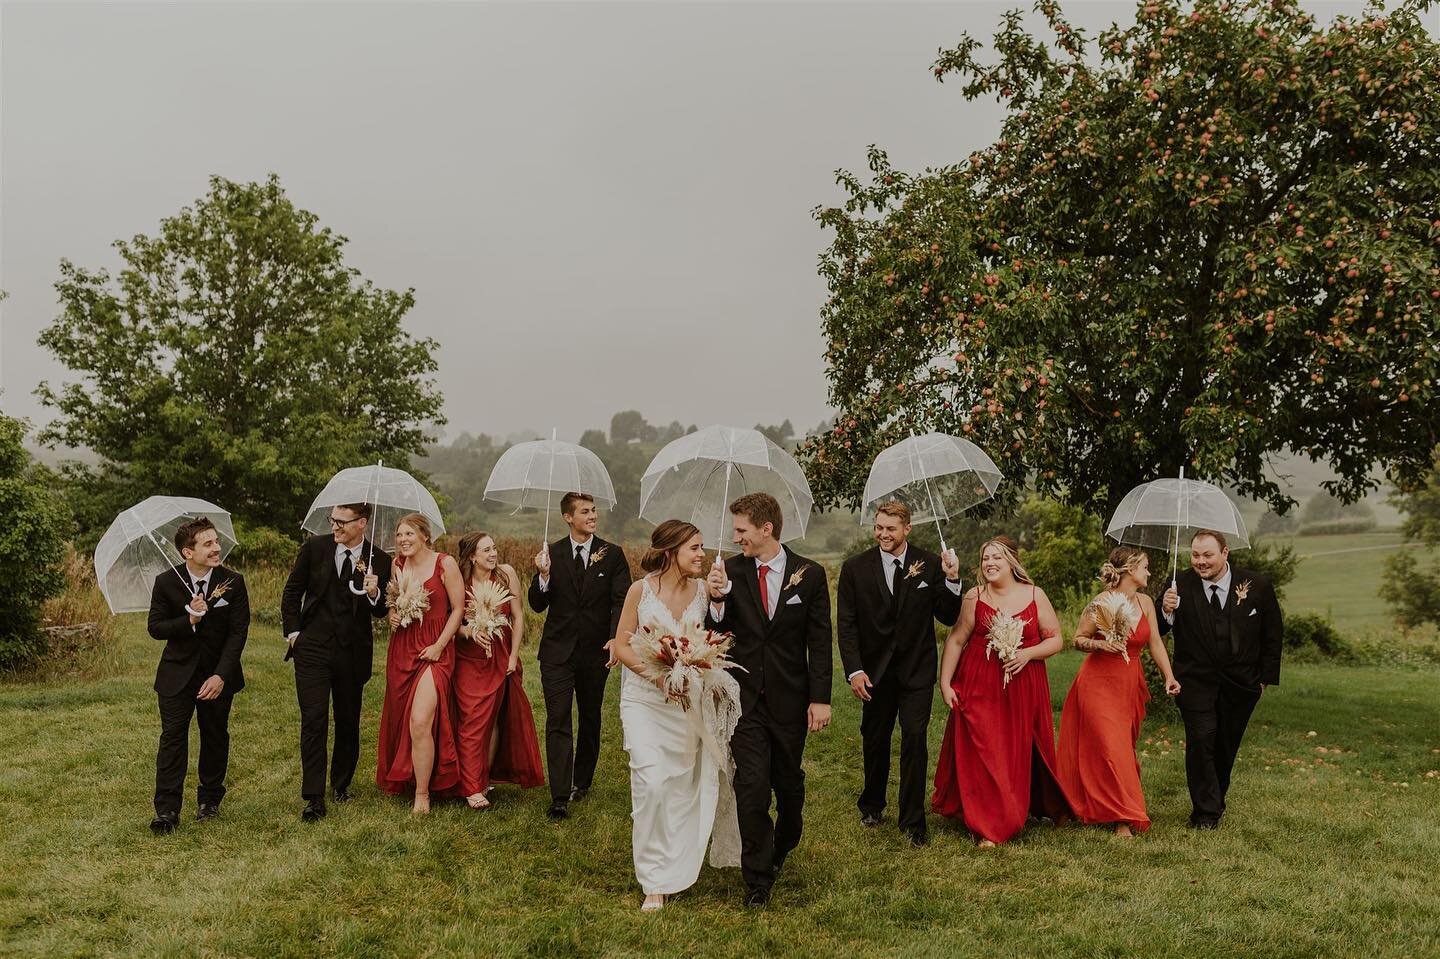 A favorite rainy day wedding party portrait from Lilly + Austin&rsquo;s beautiful boho wedding in August! 🌾

The lovely vendors from their day:

Bride dress: @verasbridals
Groom suit: @menswearhouse
Venue: @deervalleylodge
Rings: @kayjewelers
Hair: 